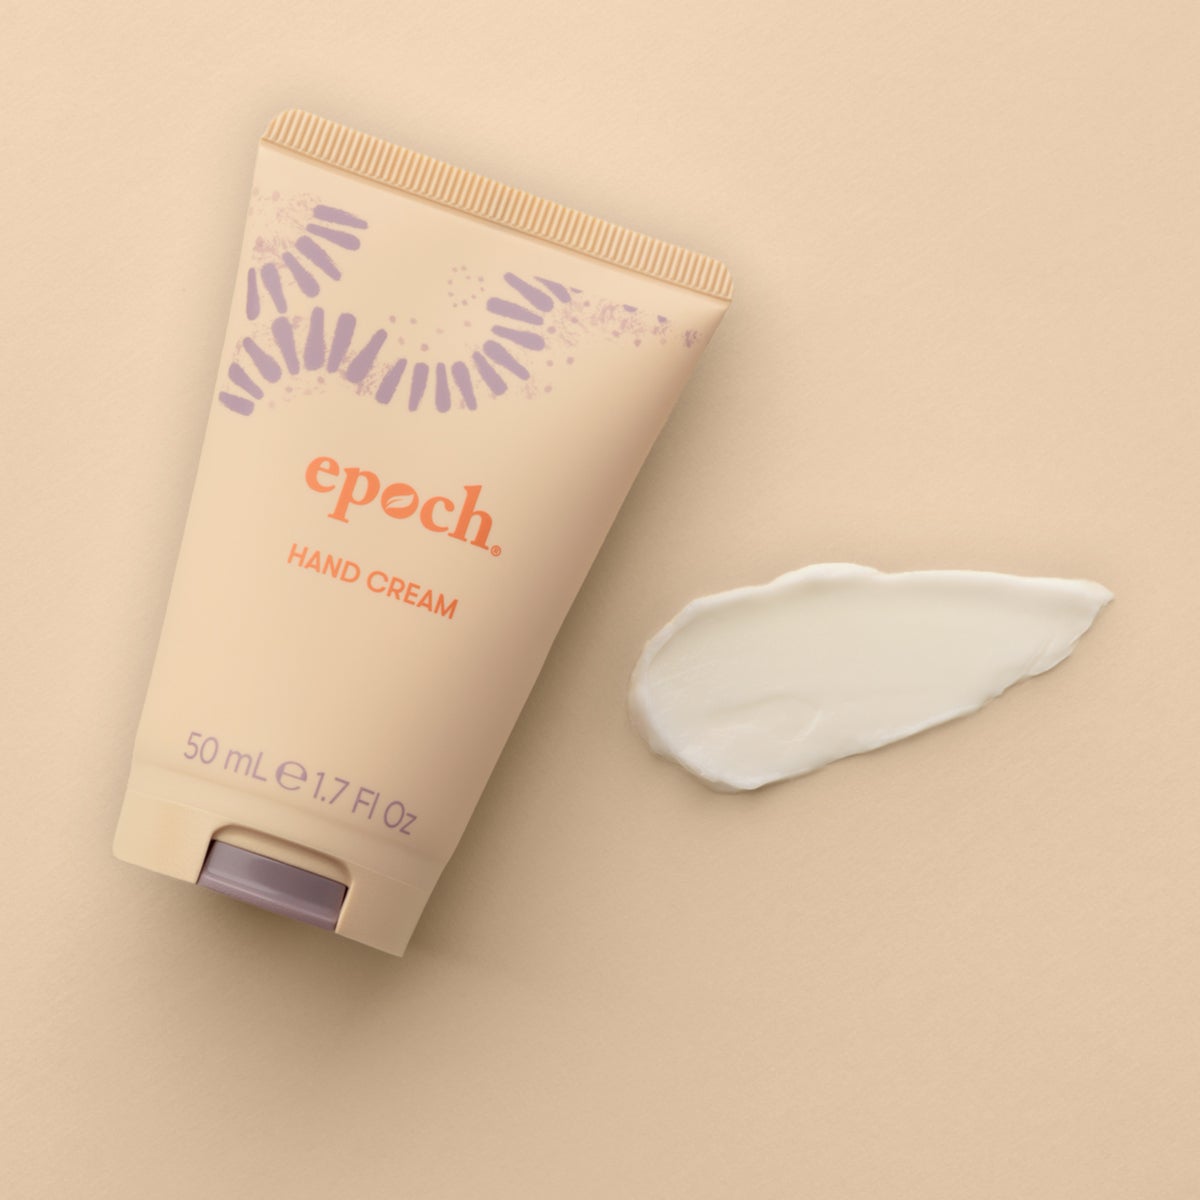 Nu Skin Epoch Hand Cream - creamy texture to hydrate your dry hands